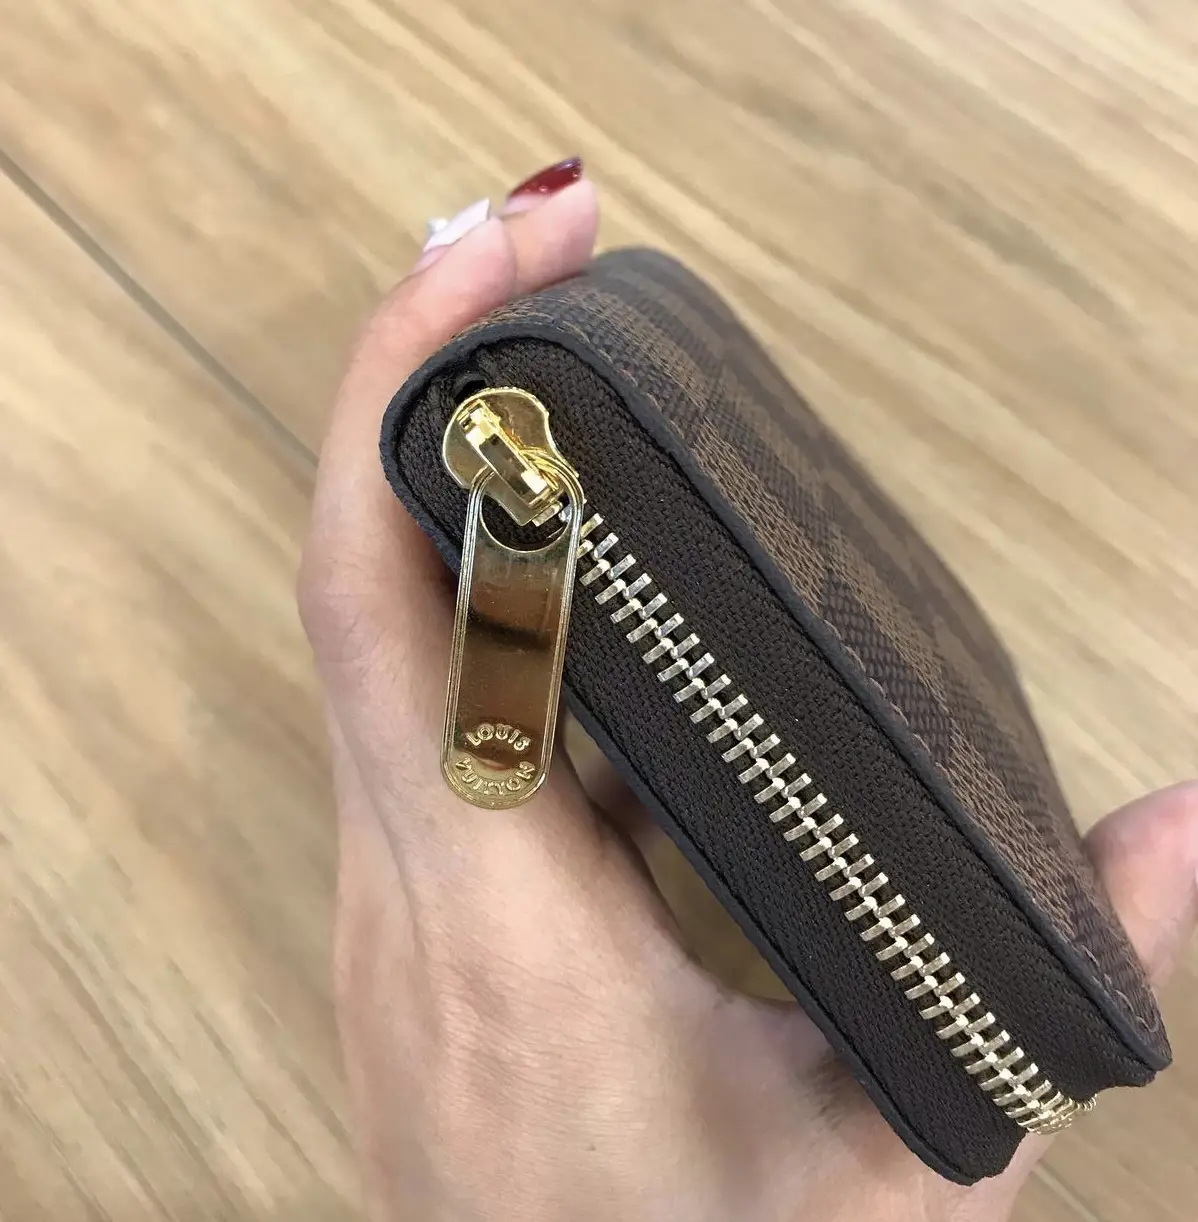 LOUIS VUITTON ENVELOPE BUSINESS CARD HOLDER (An Underrated Compact